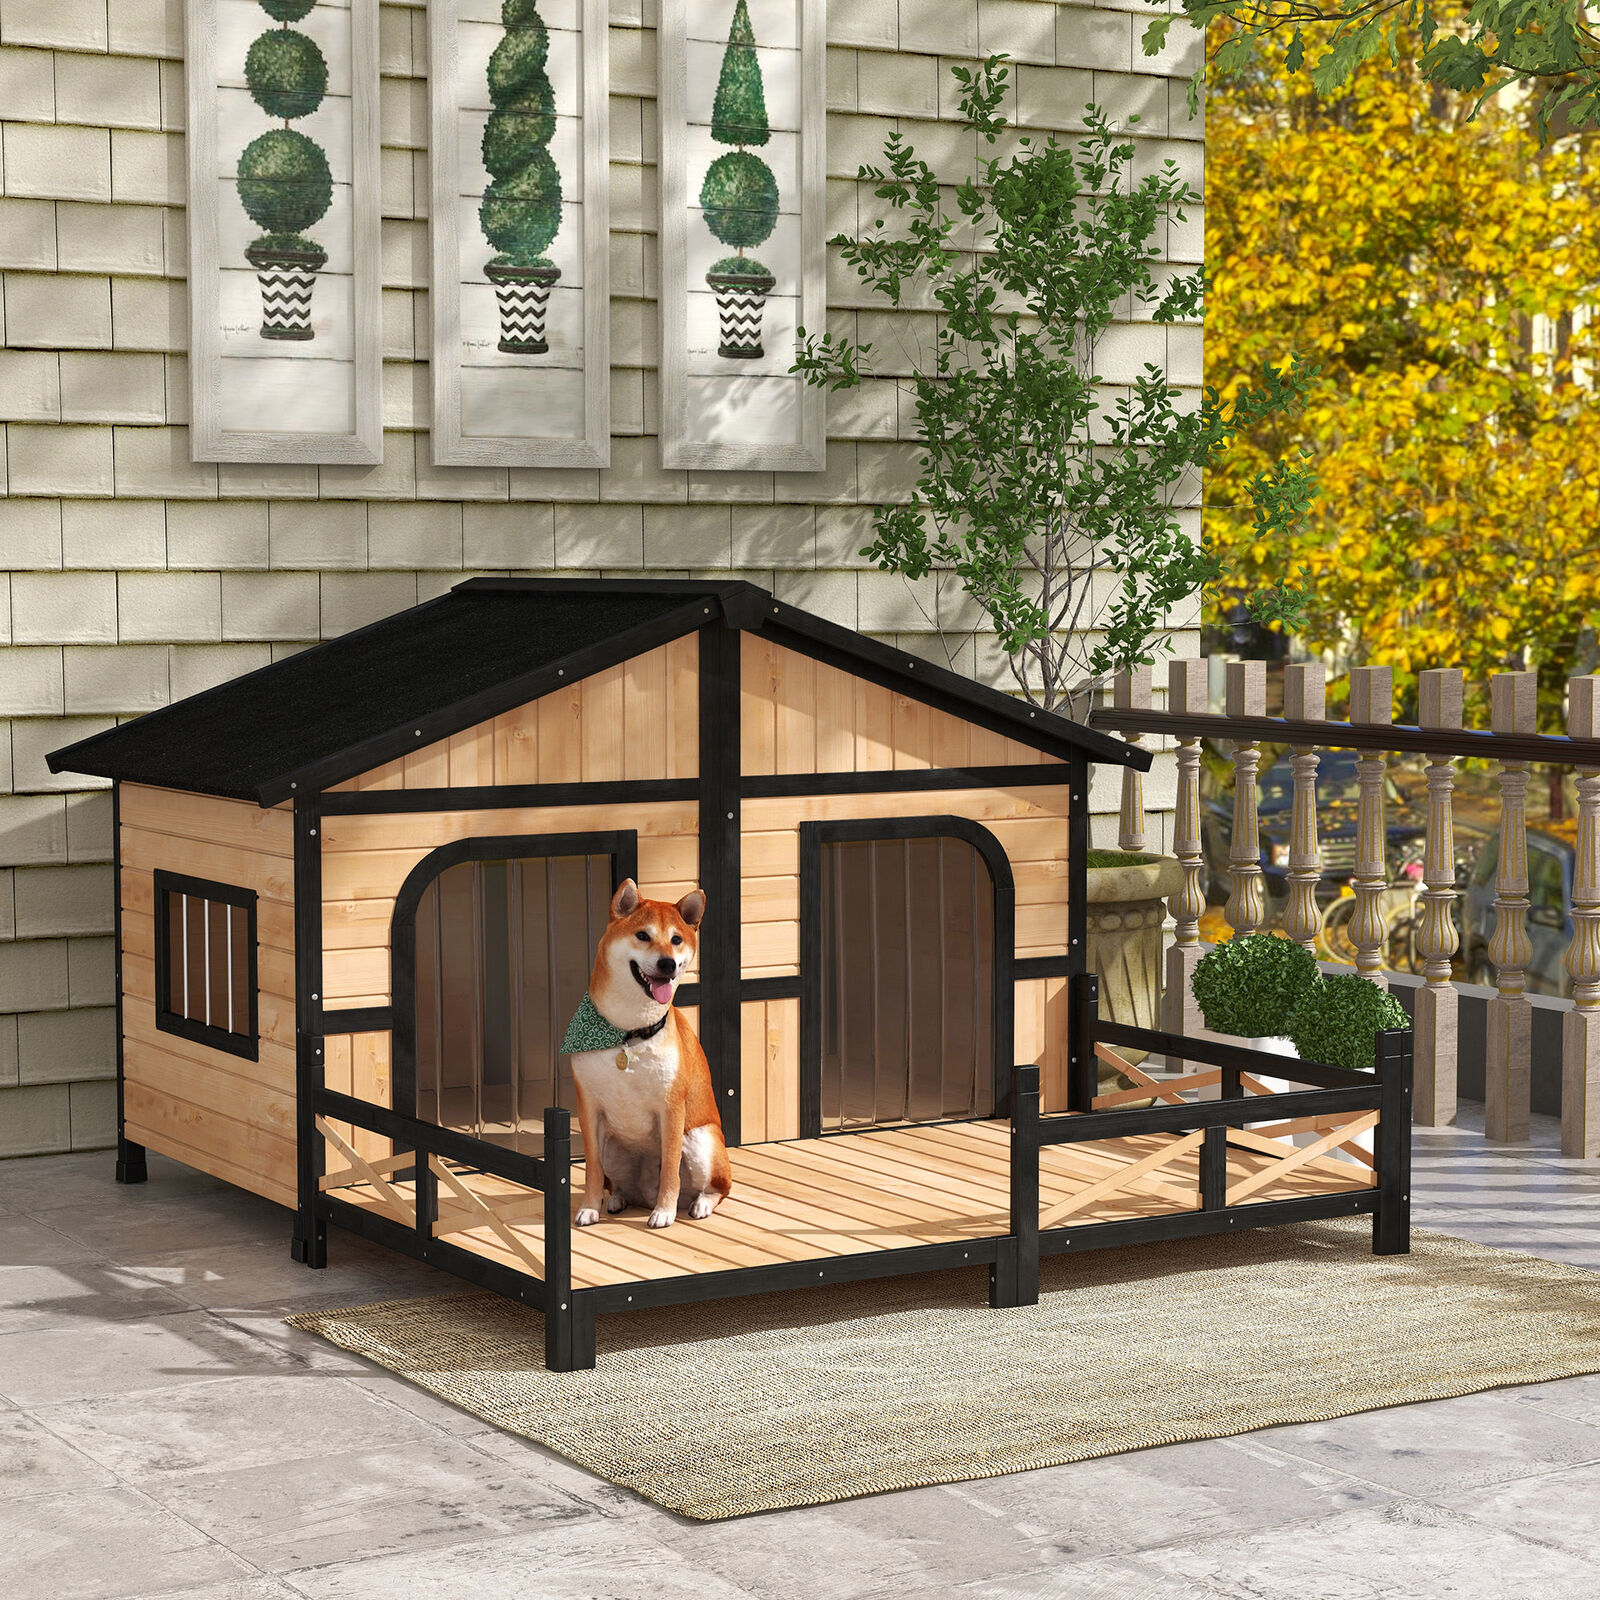 Pawhut Wooden Elevated Backyard All Weather Rustic Log Cabin Pet Dog House Kit